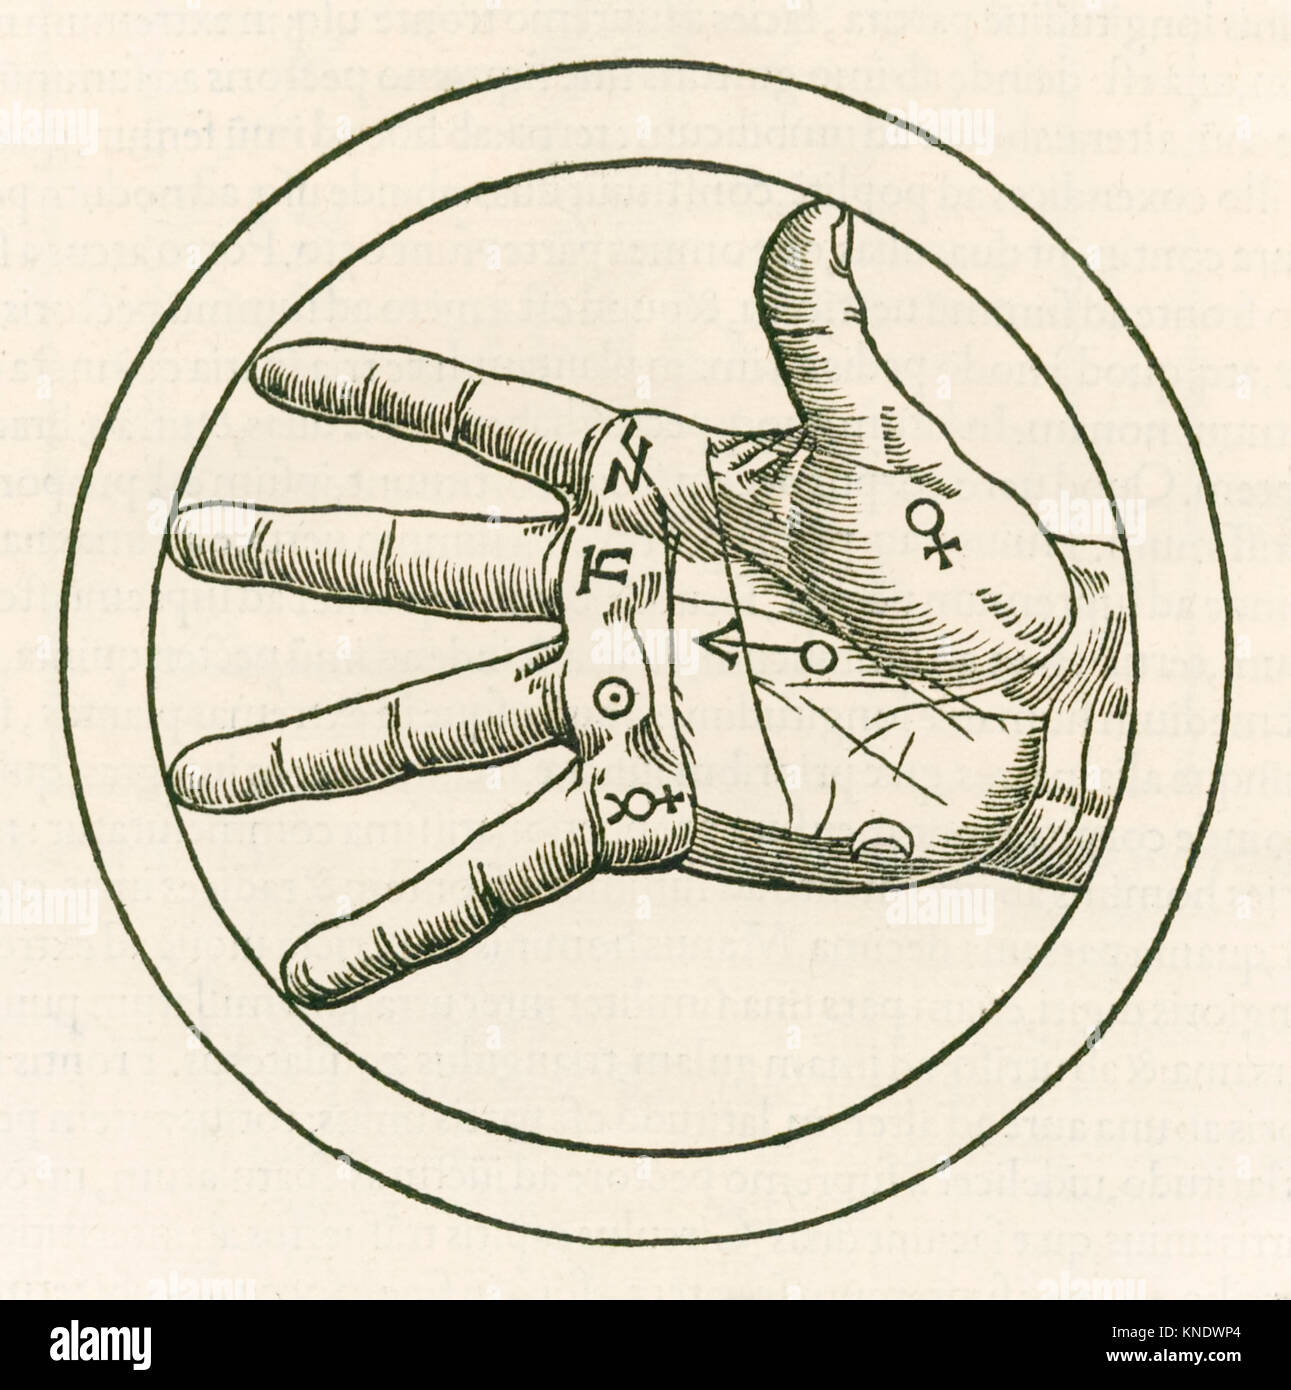 ‘The Hand of Palmistry’ engraving from Heinrich Cornelius Agrippa von Nettesheim (1486-1535) ‘De occulta philosophia libri tres’ (Three Books of Occult Philosophy) published in 1533. See more information below. Stock Photo